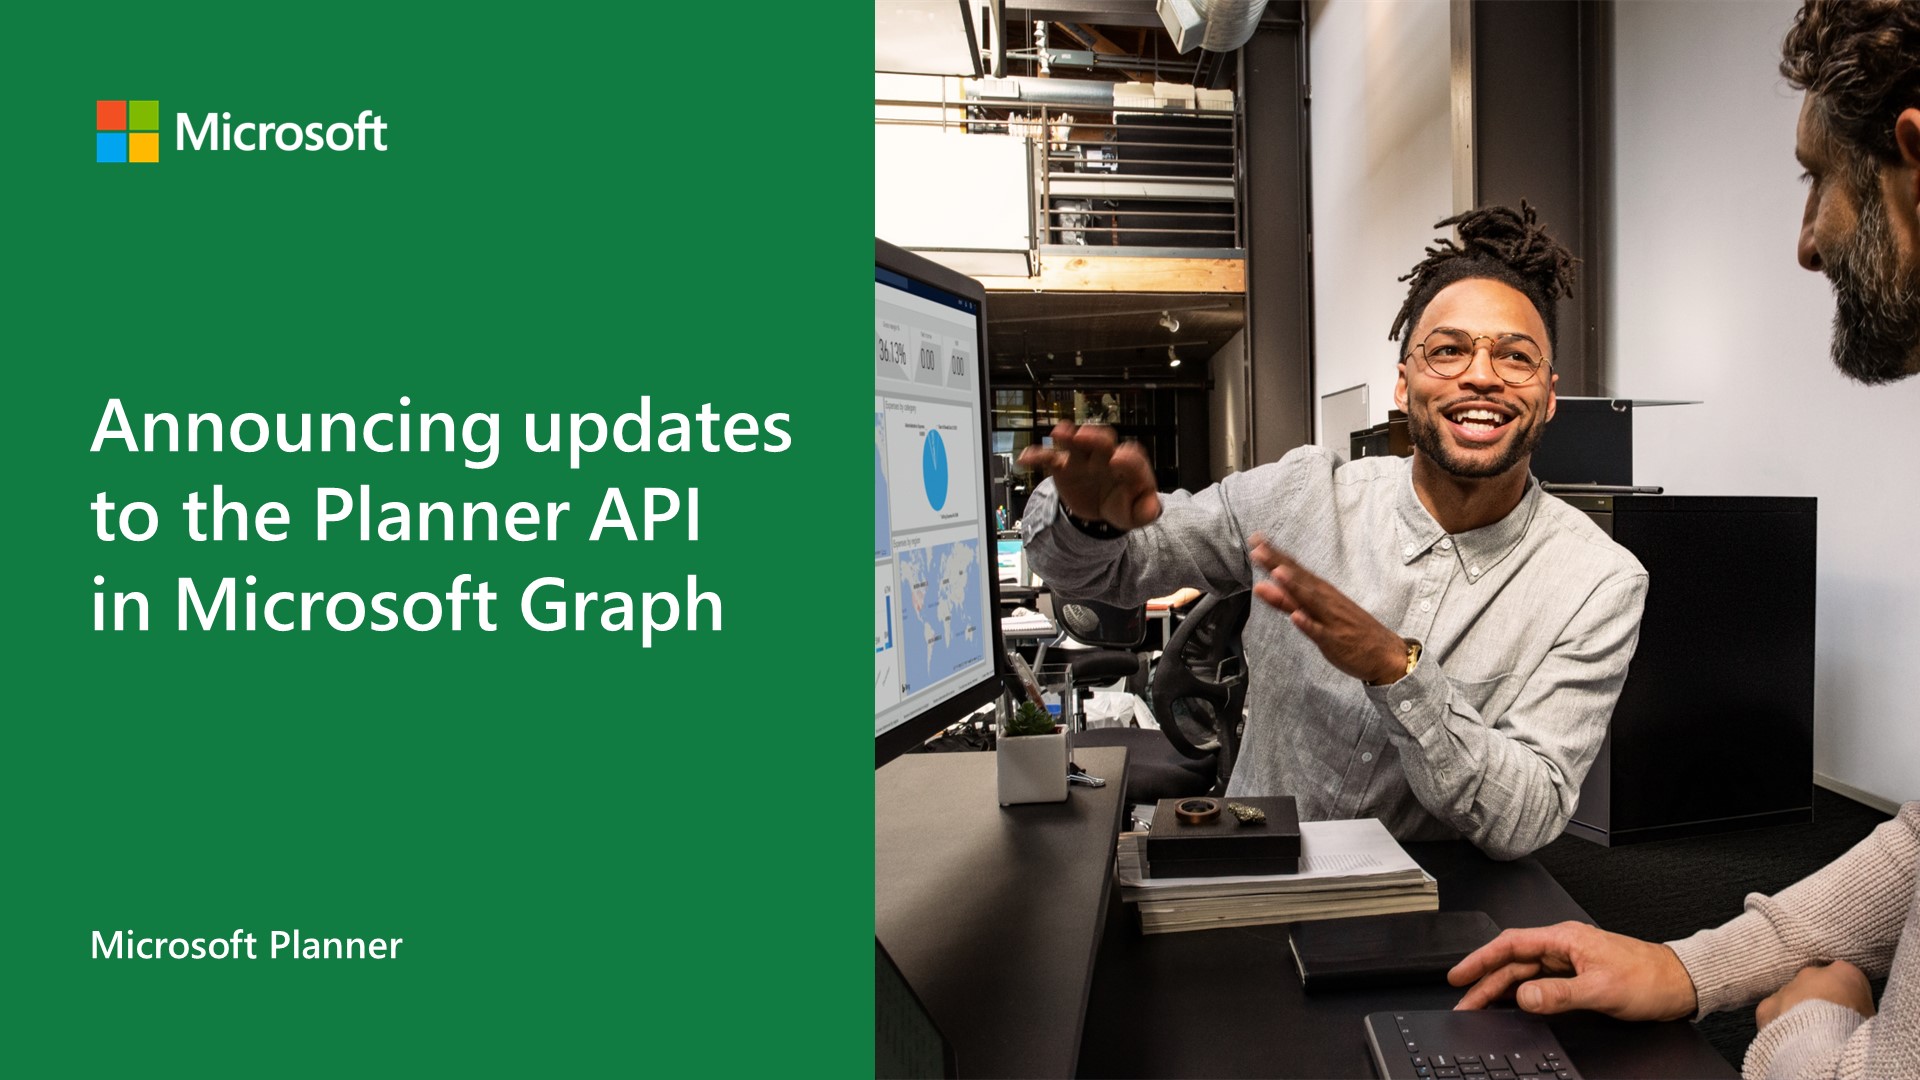 Announcing updates to the Planner API in Microsoft Graph